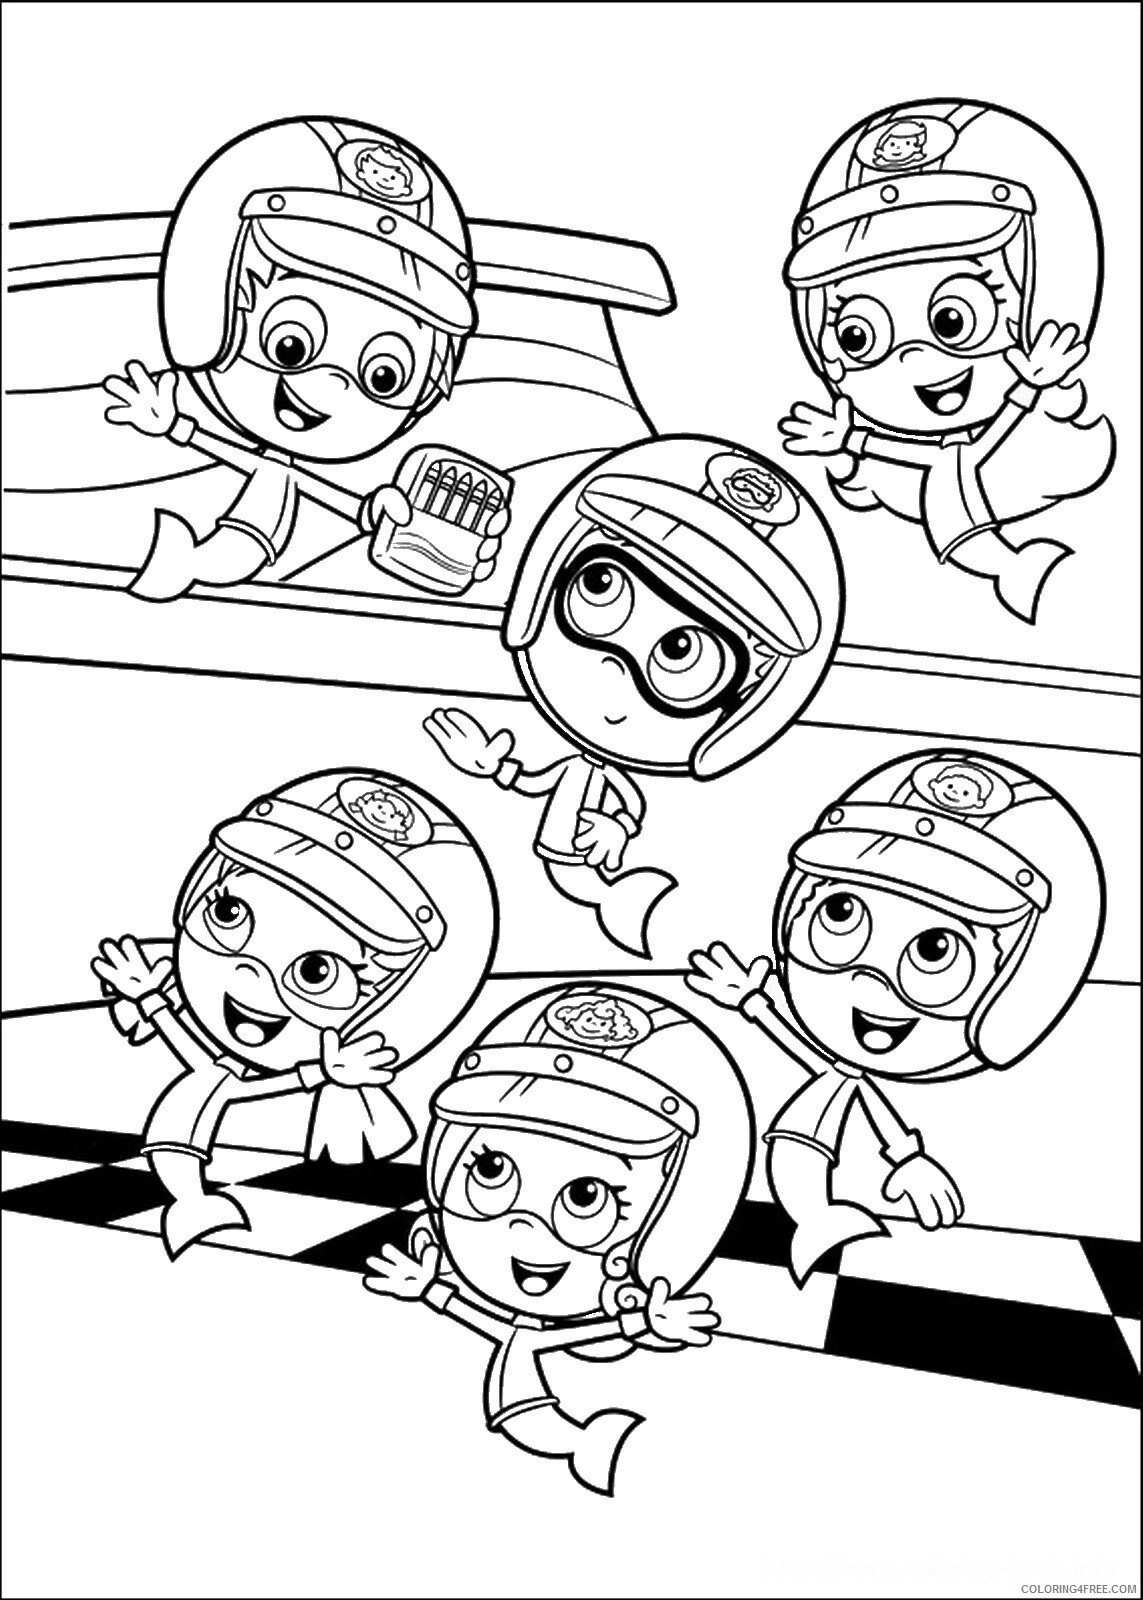 Bubble Guppies Coloring Pages TV Film bubble_guppies_cl08 Printable 2020 01539 Coloring4free